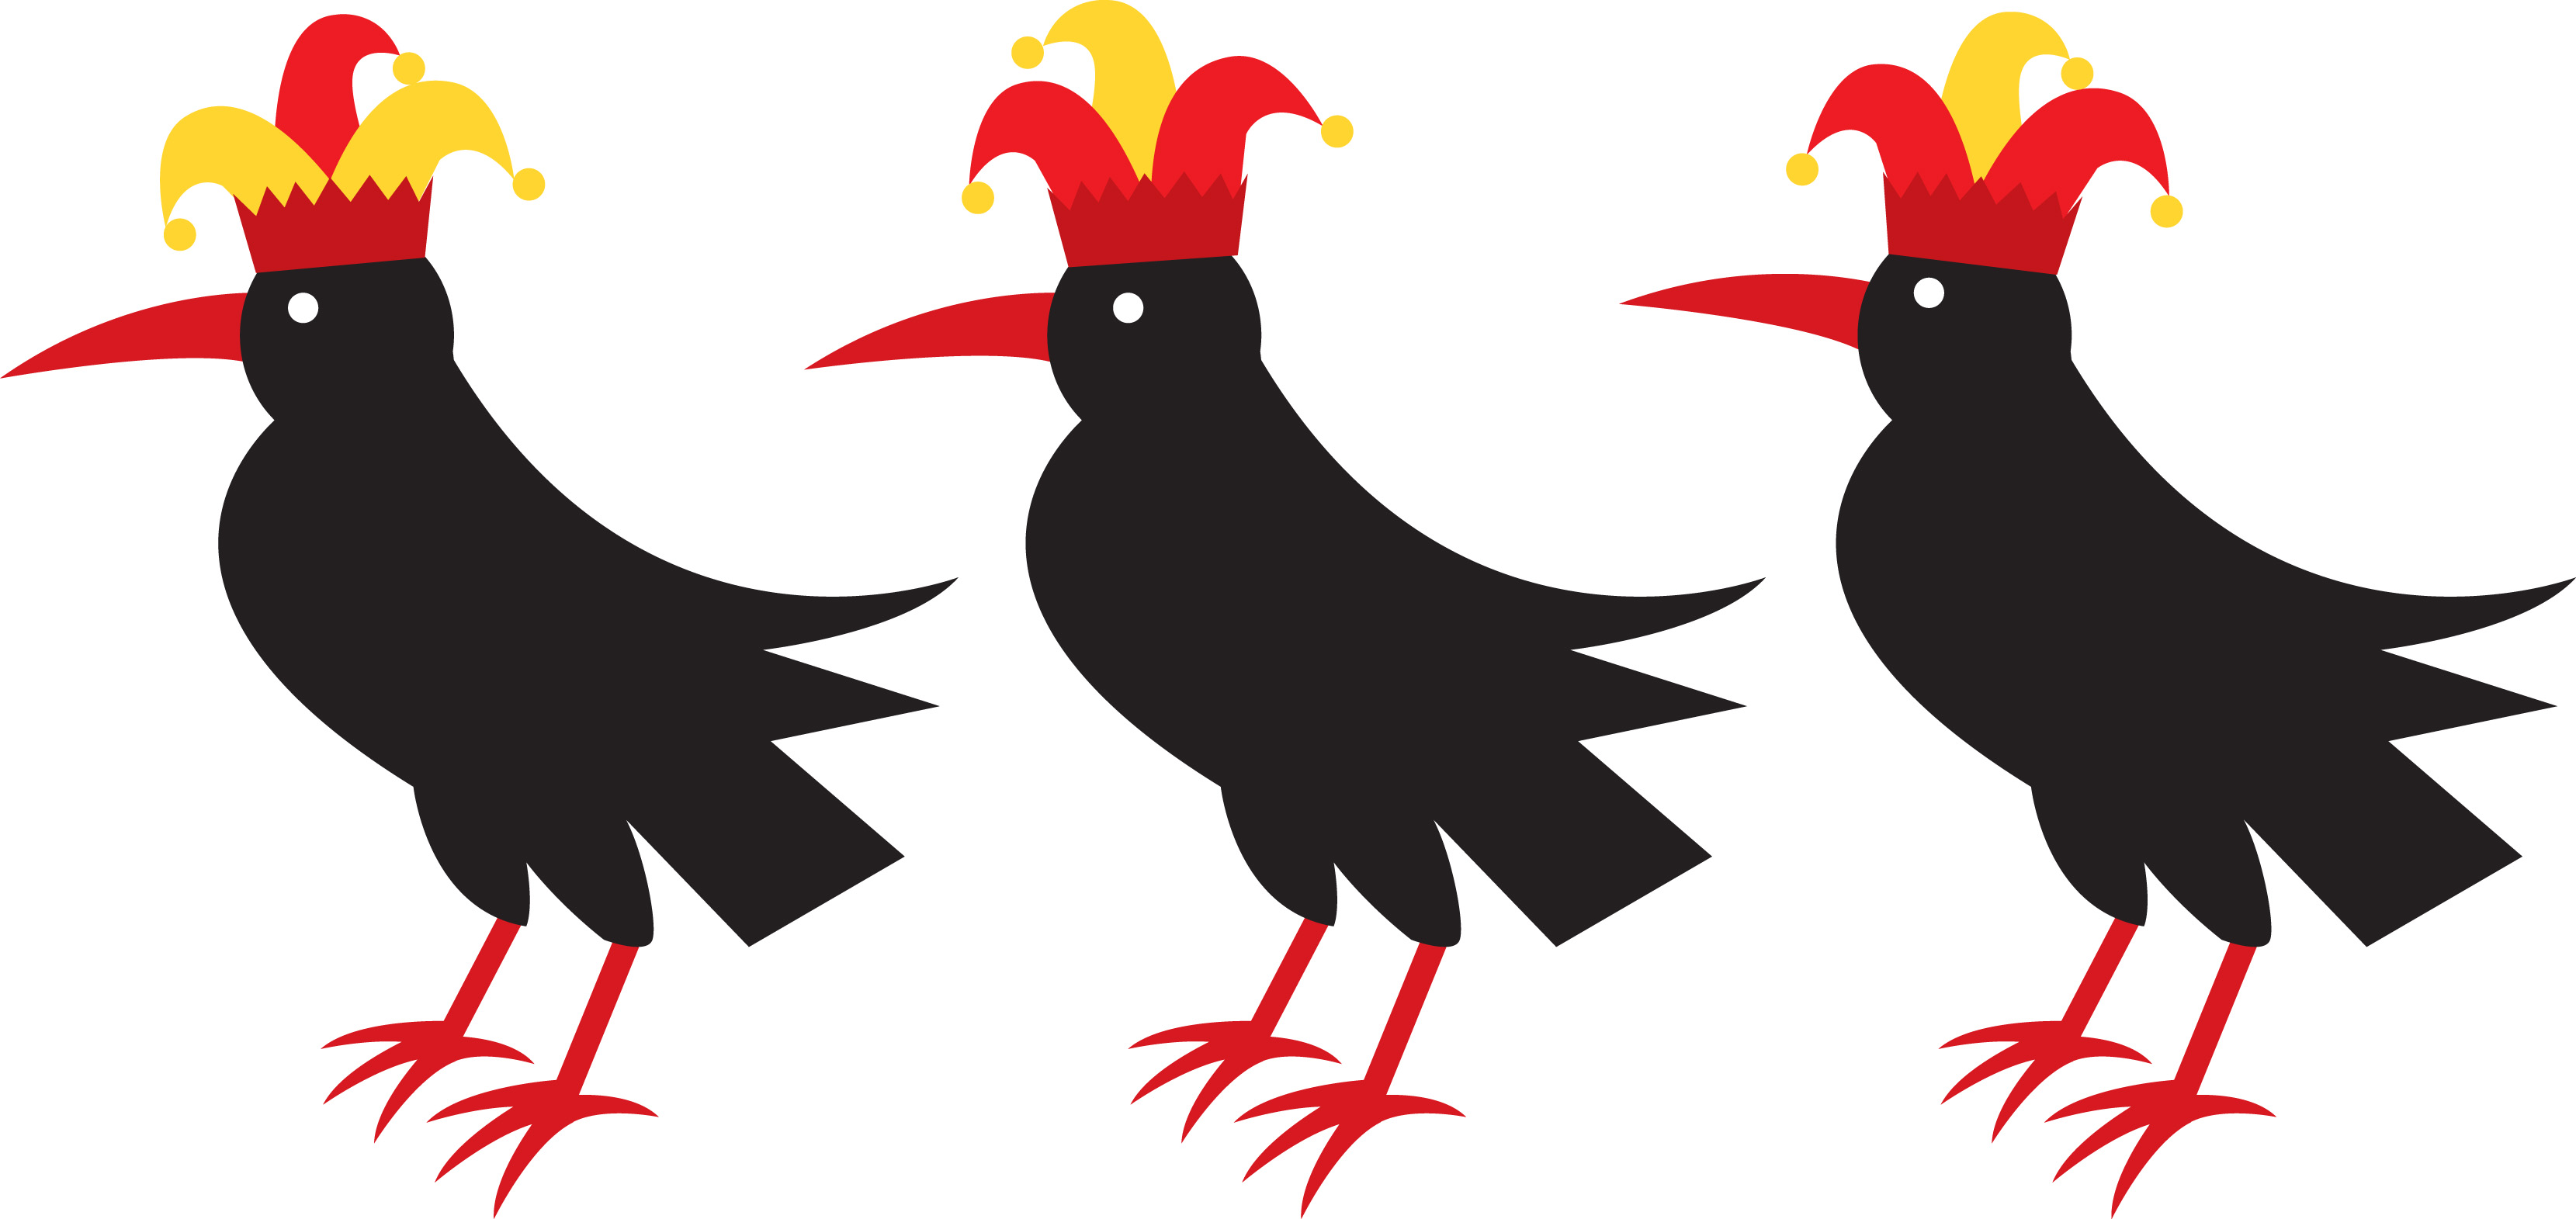 Three illustrated corvids in jester hats